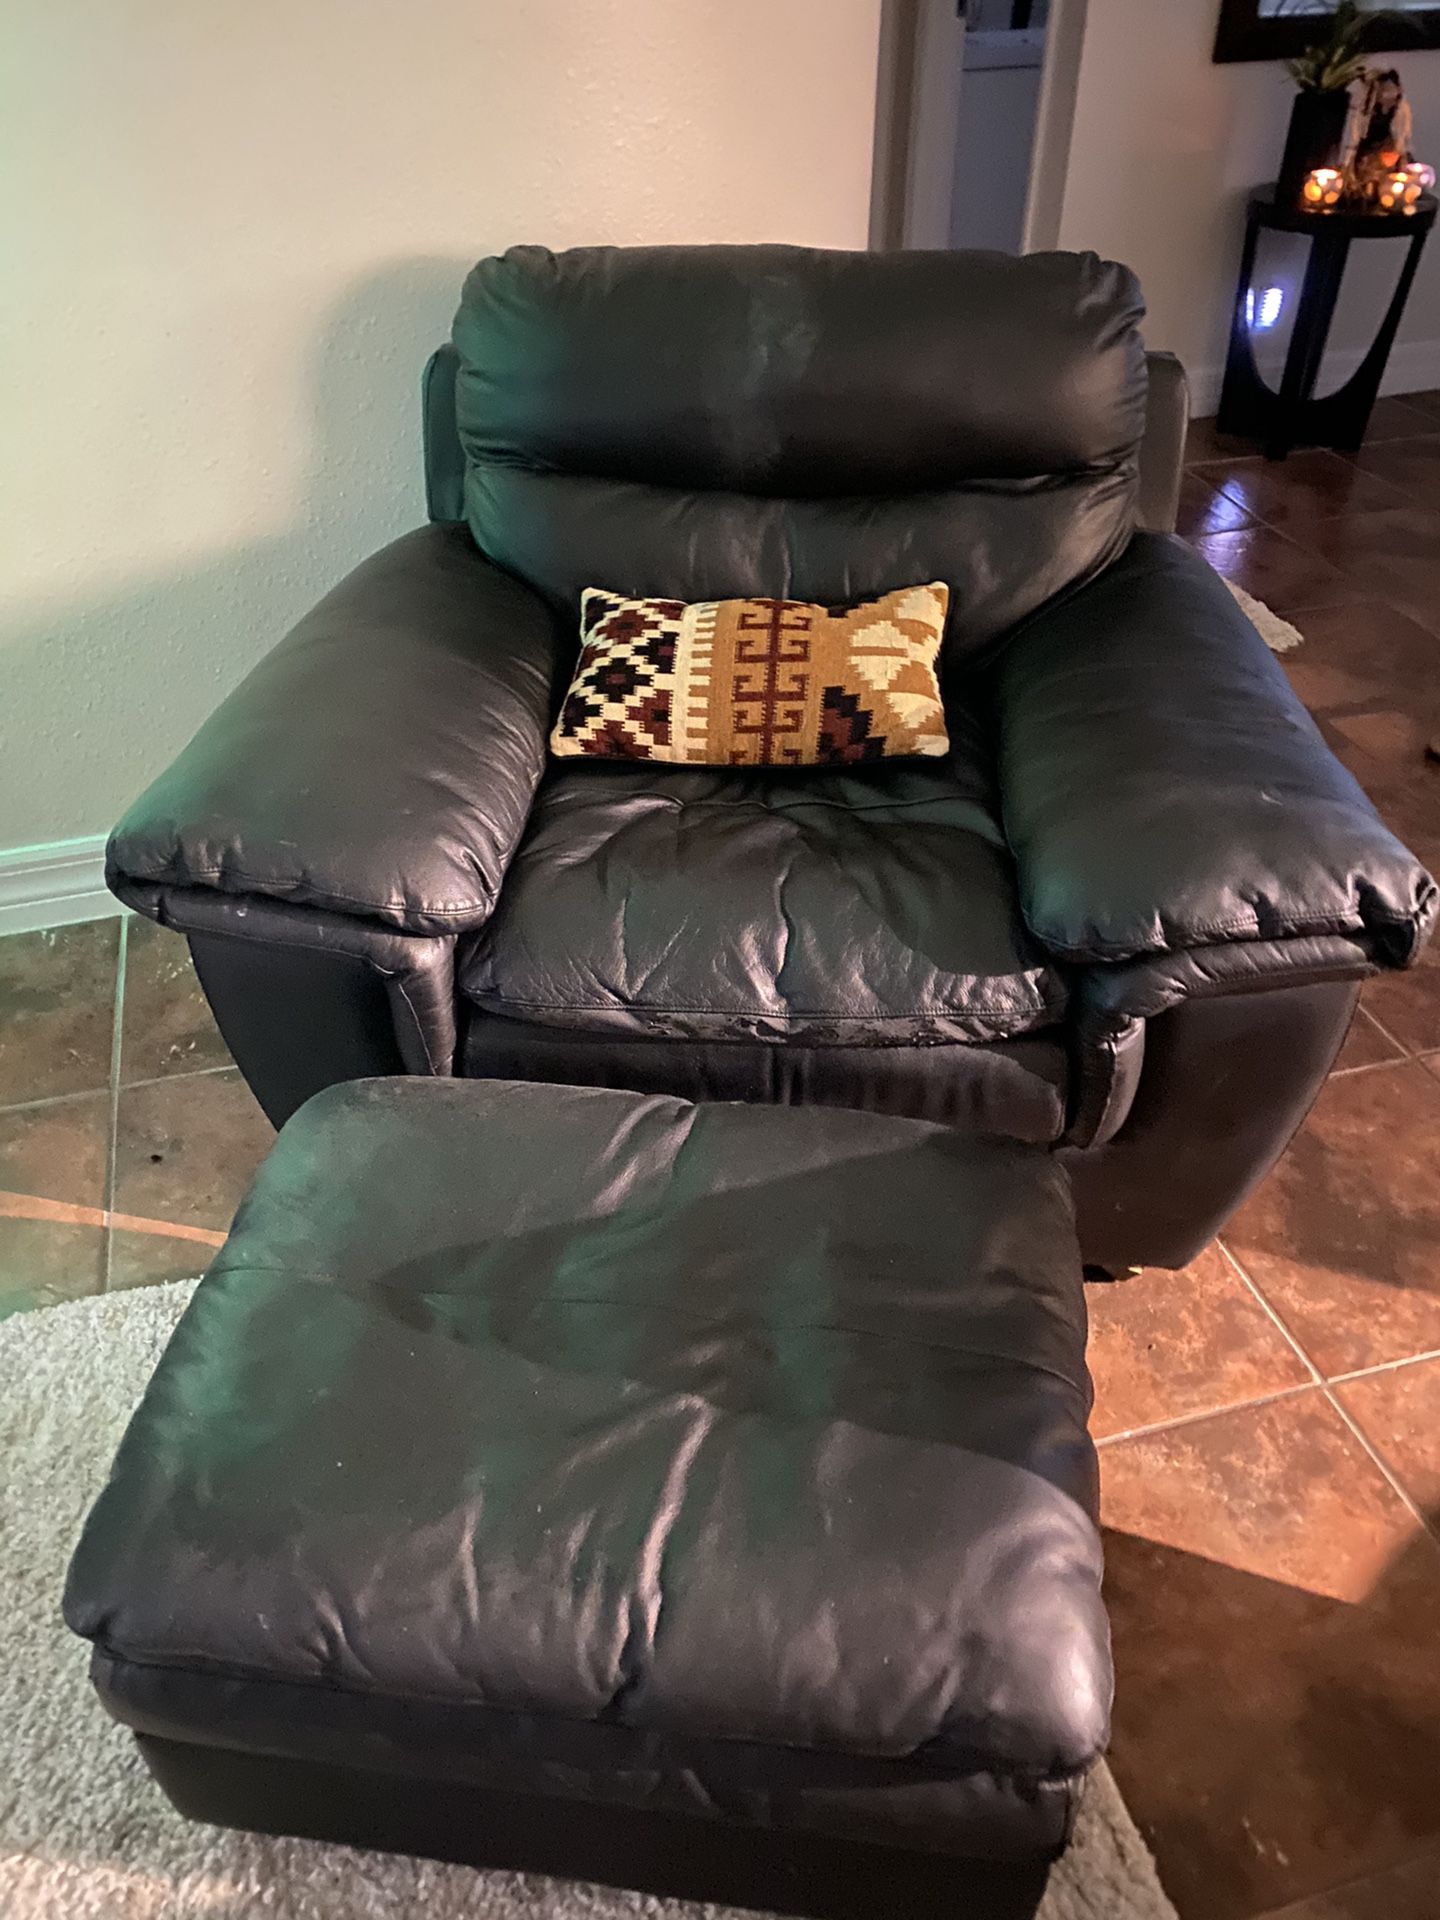 Leather chair and ottoman